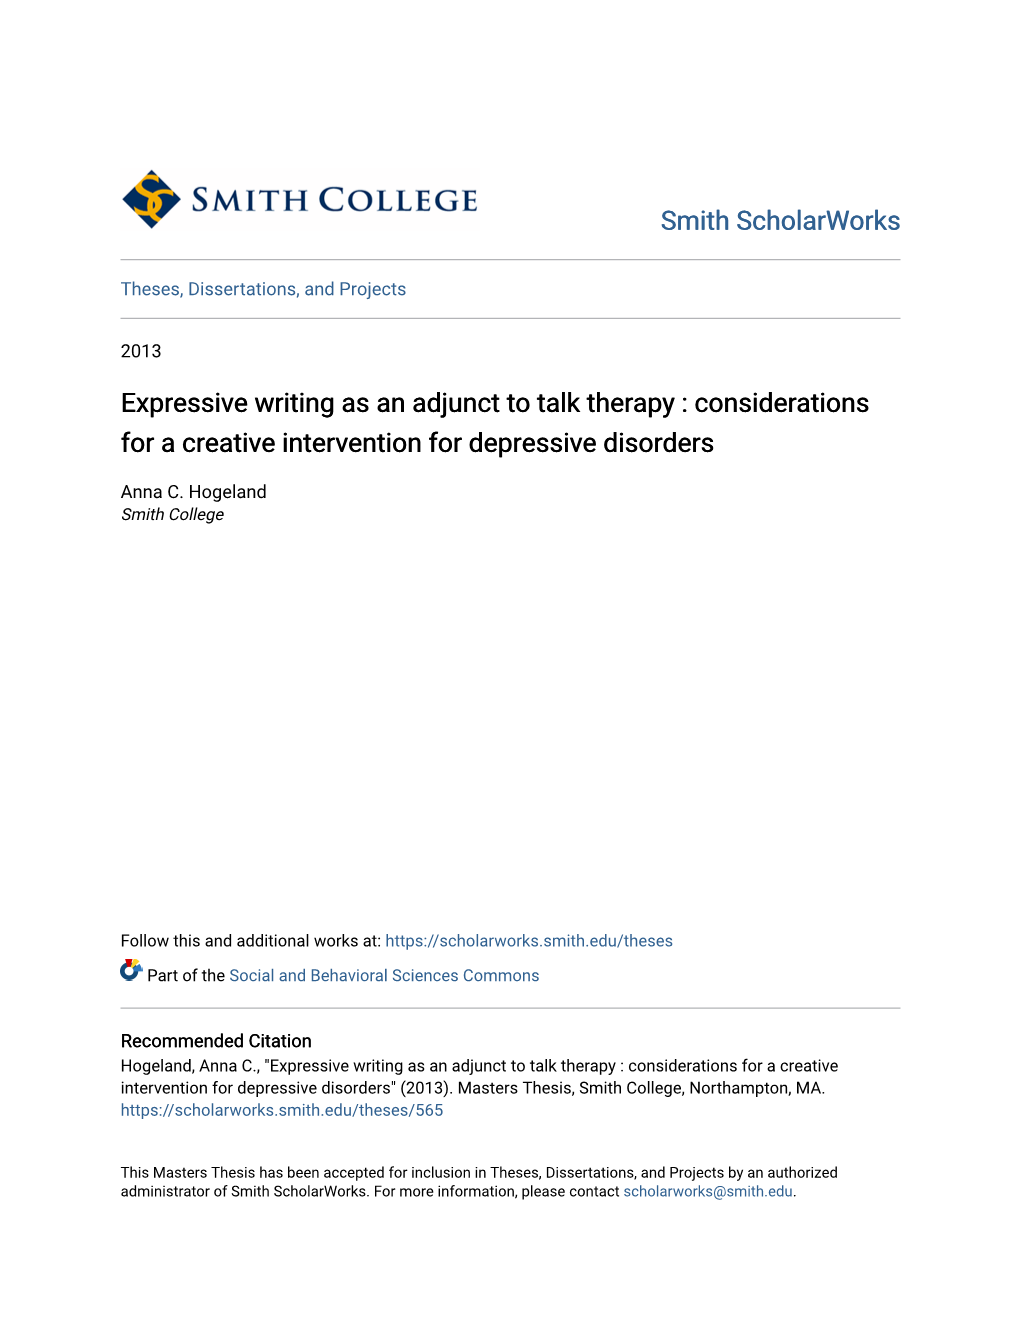 Expressive Writing As an Adjunct to Talk Therapy : Considerations for a Creative Intervention for Depressive Disorders